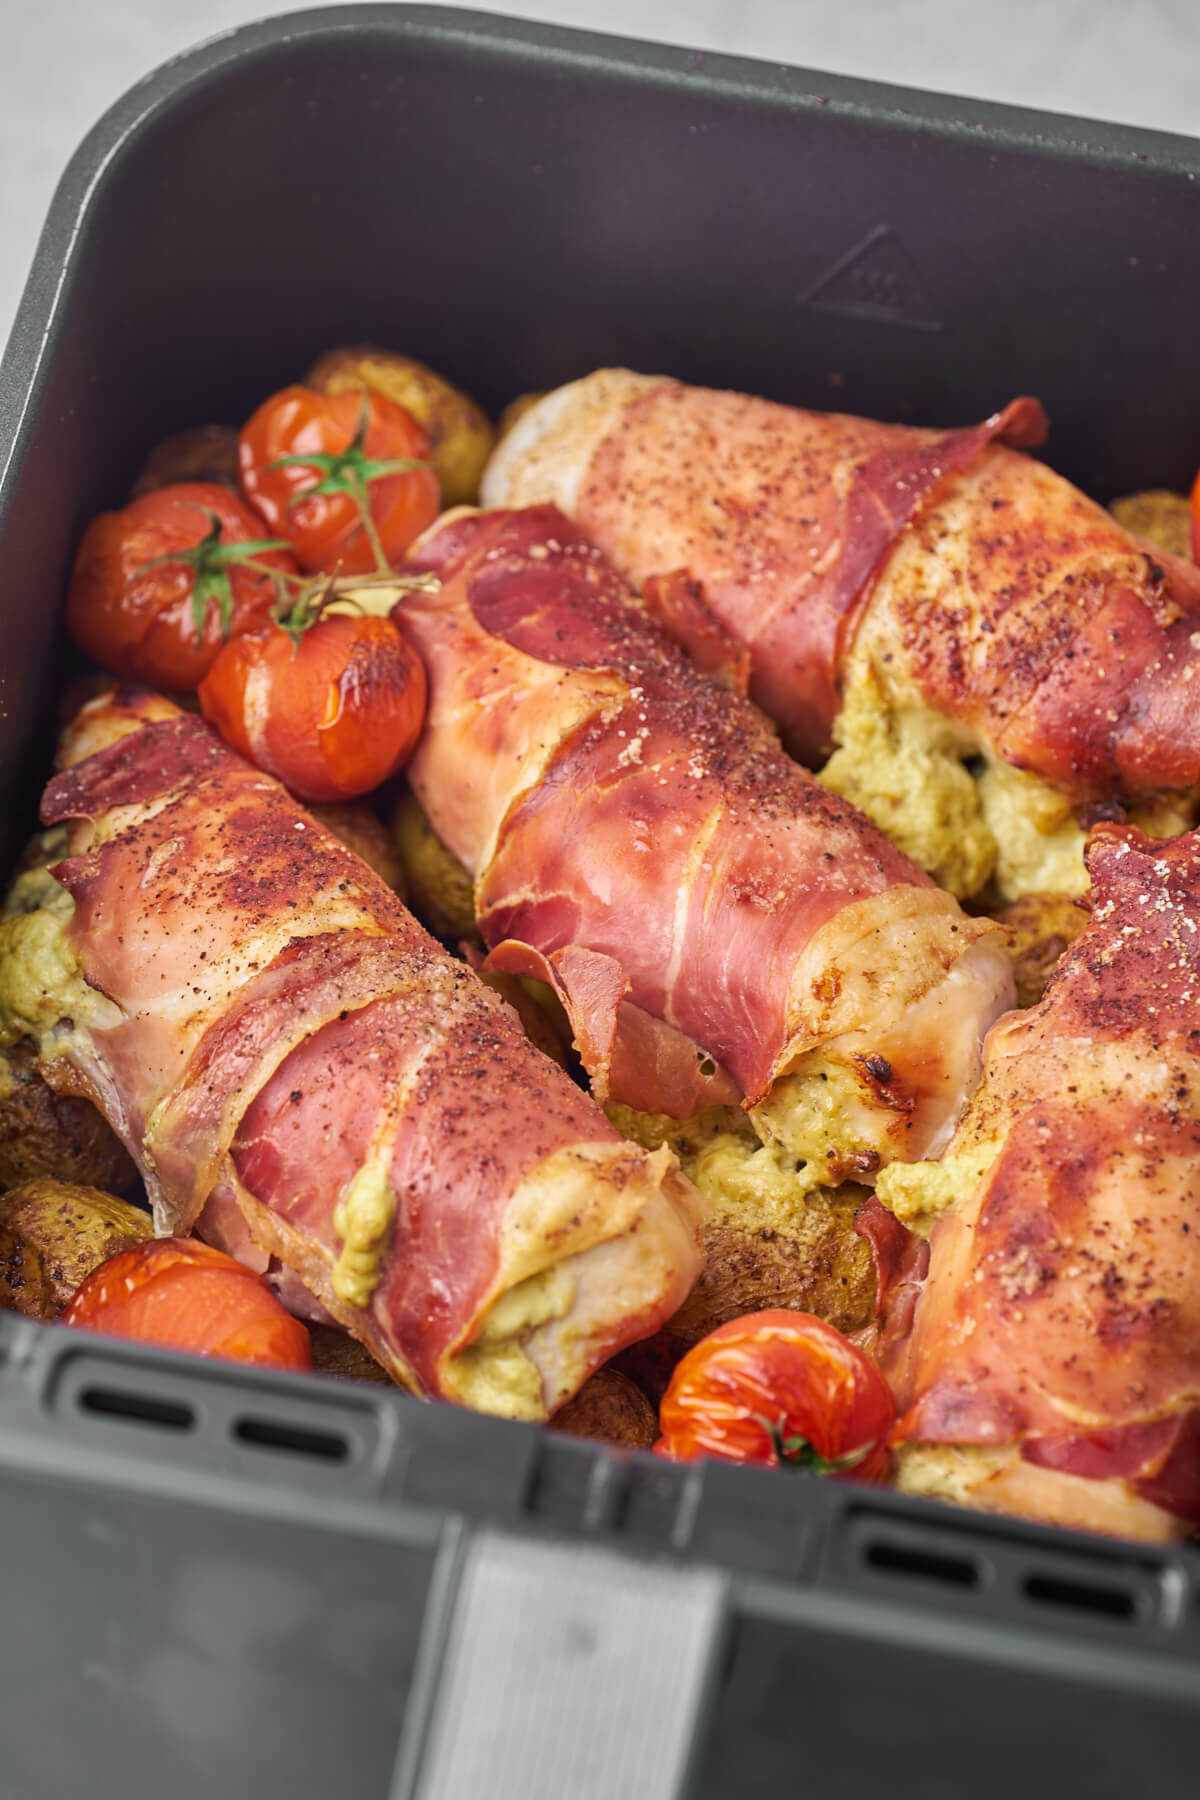 air fryer basted with filled chicken breast, potatoes and tomatoes